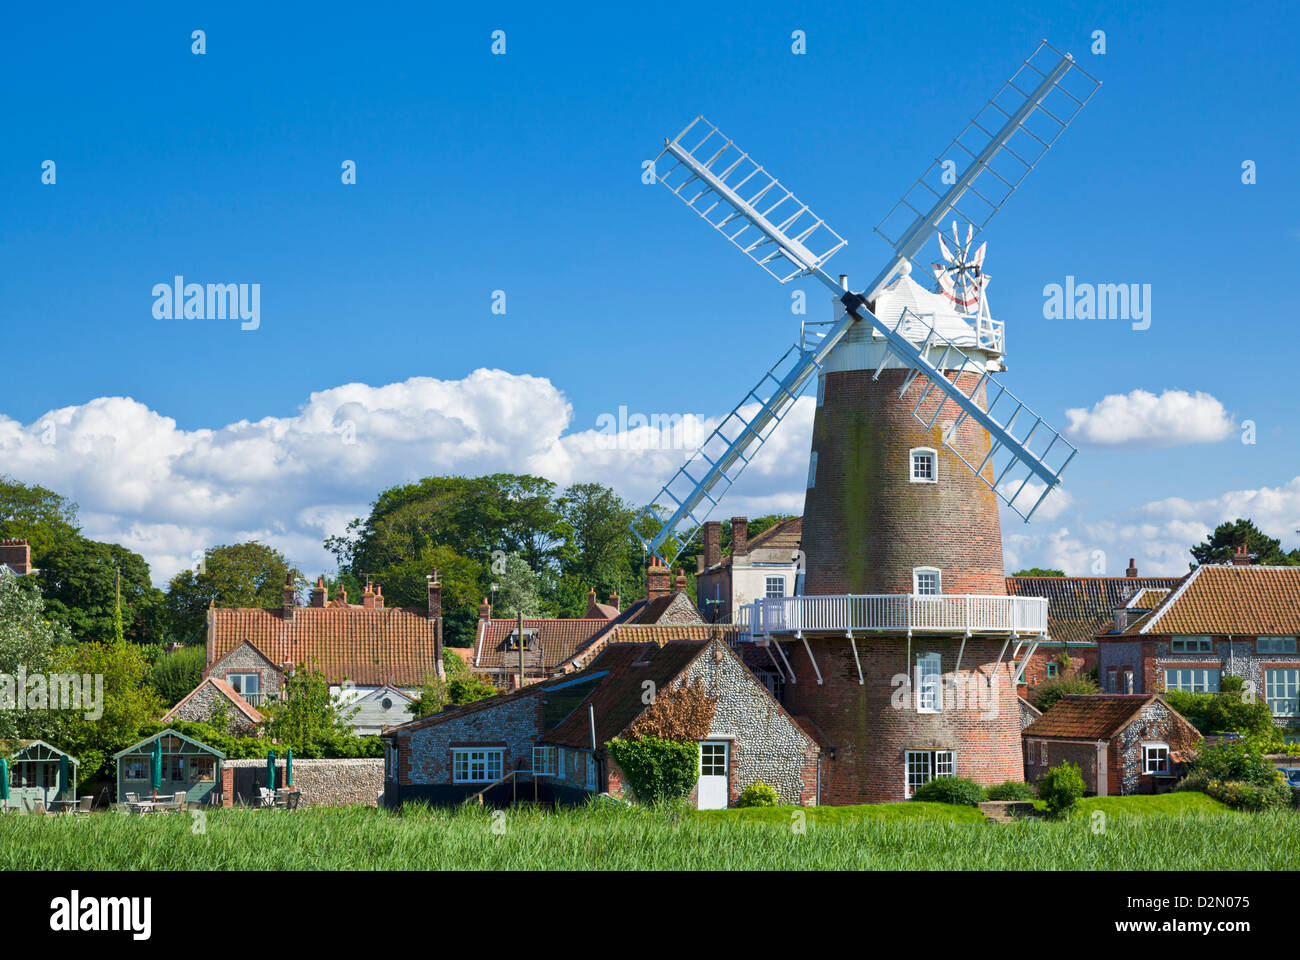 Restored 18th century Cley Windmill, Cley next the Sea, Norfolk, East Anglia, England, United Kingdom, Europe Stock Photo